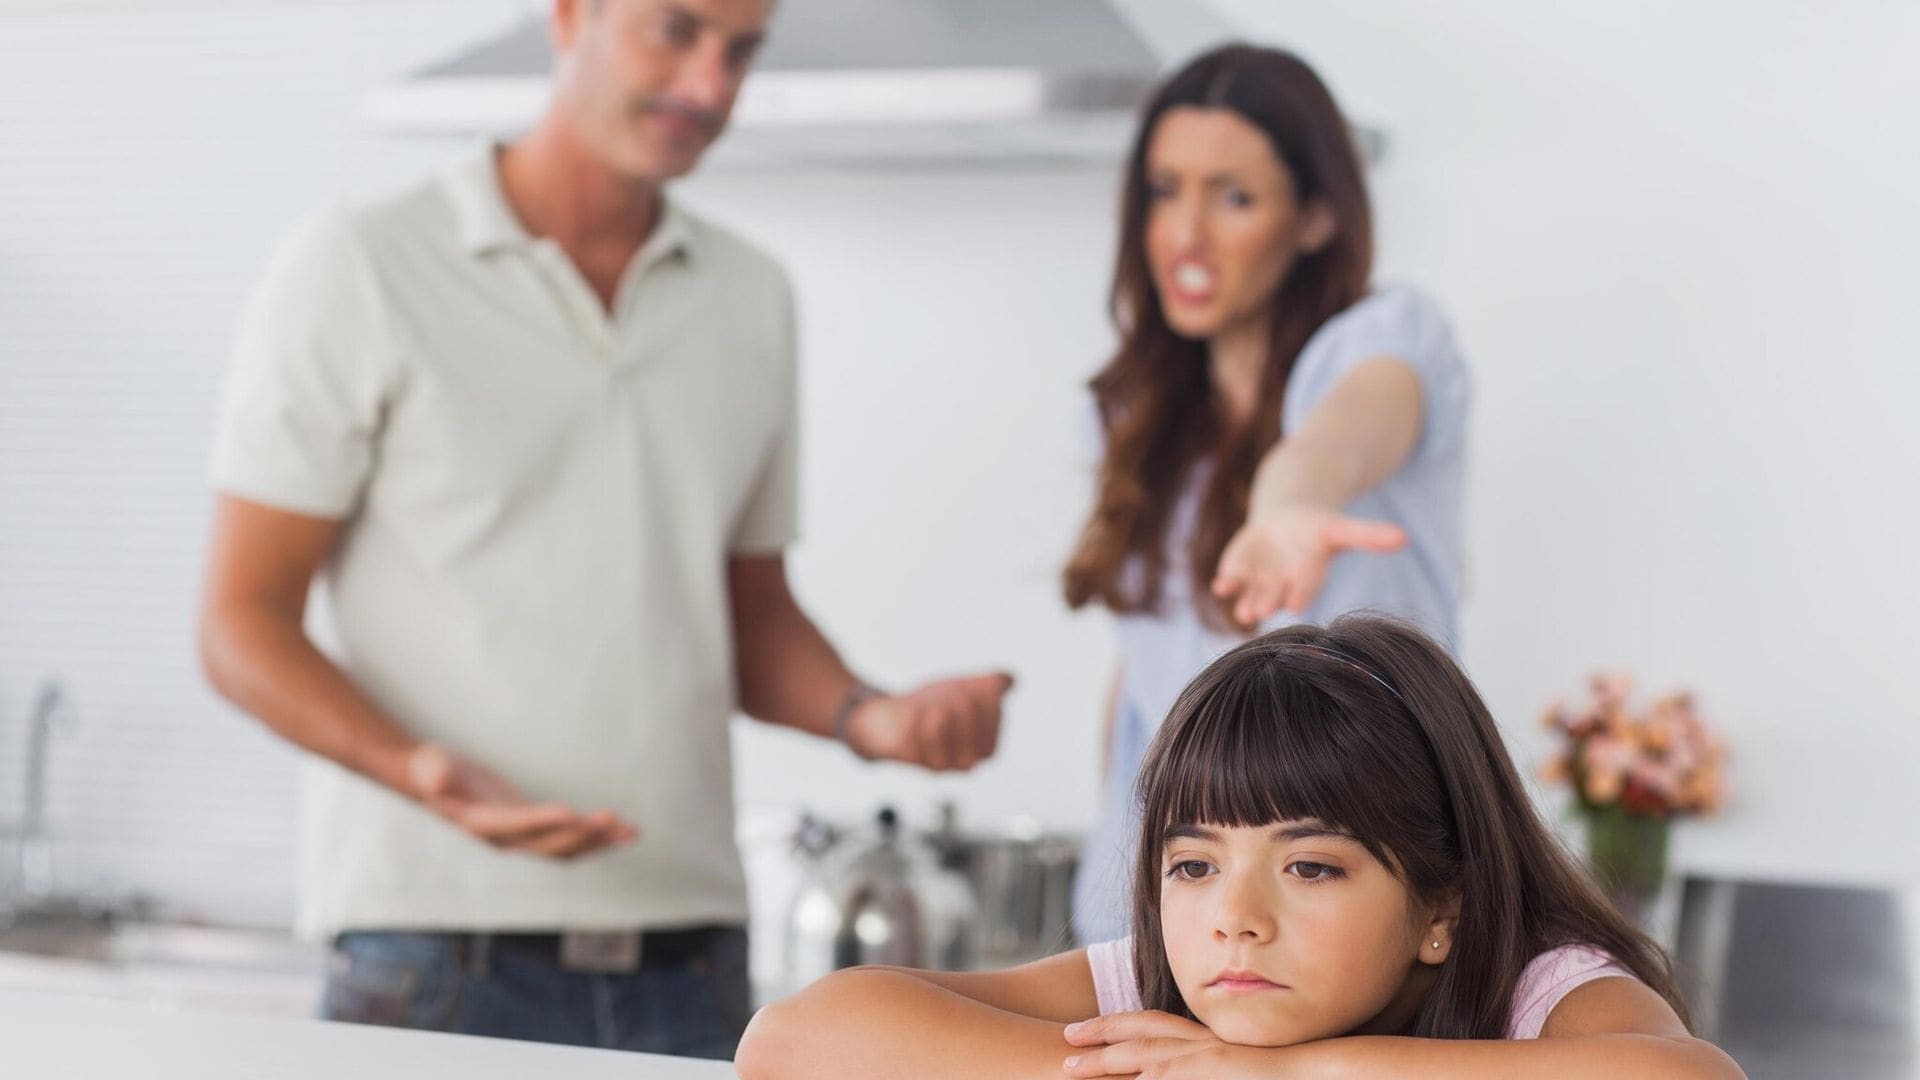 couple having dispute in front of their upset daughter